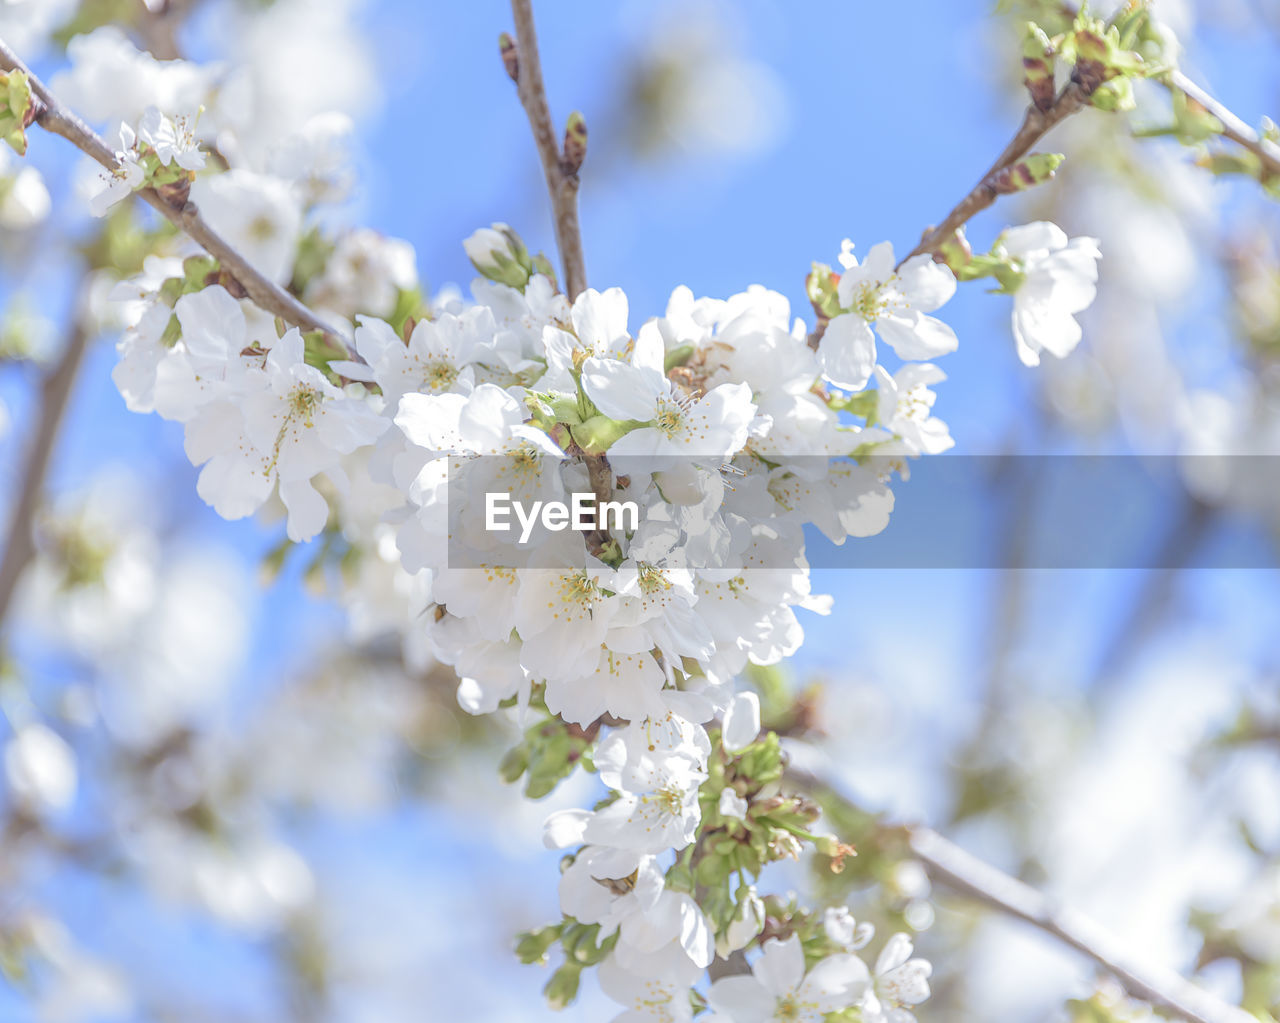 plant, flower, flowering plant, blossom, tree, springtime, fragility, freshness, beauty in nature, growth, branch, nature, produce, white, food, spring, cherry blossom, close-up, no people, flower head, fruit tree, twig, outdoors, botany, sky, day, inflorescence, fruit, focus on foreground, food and drink, petal, selective focus, low angle view, almond tree, sunlight, cherry tree, agriculture, apple tree, blue, almond